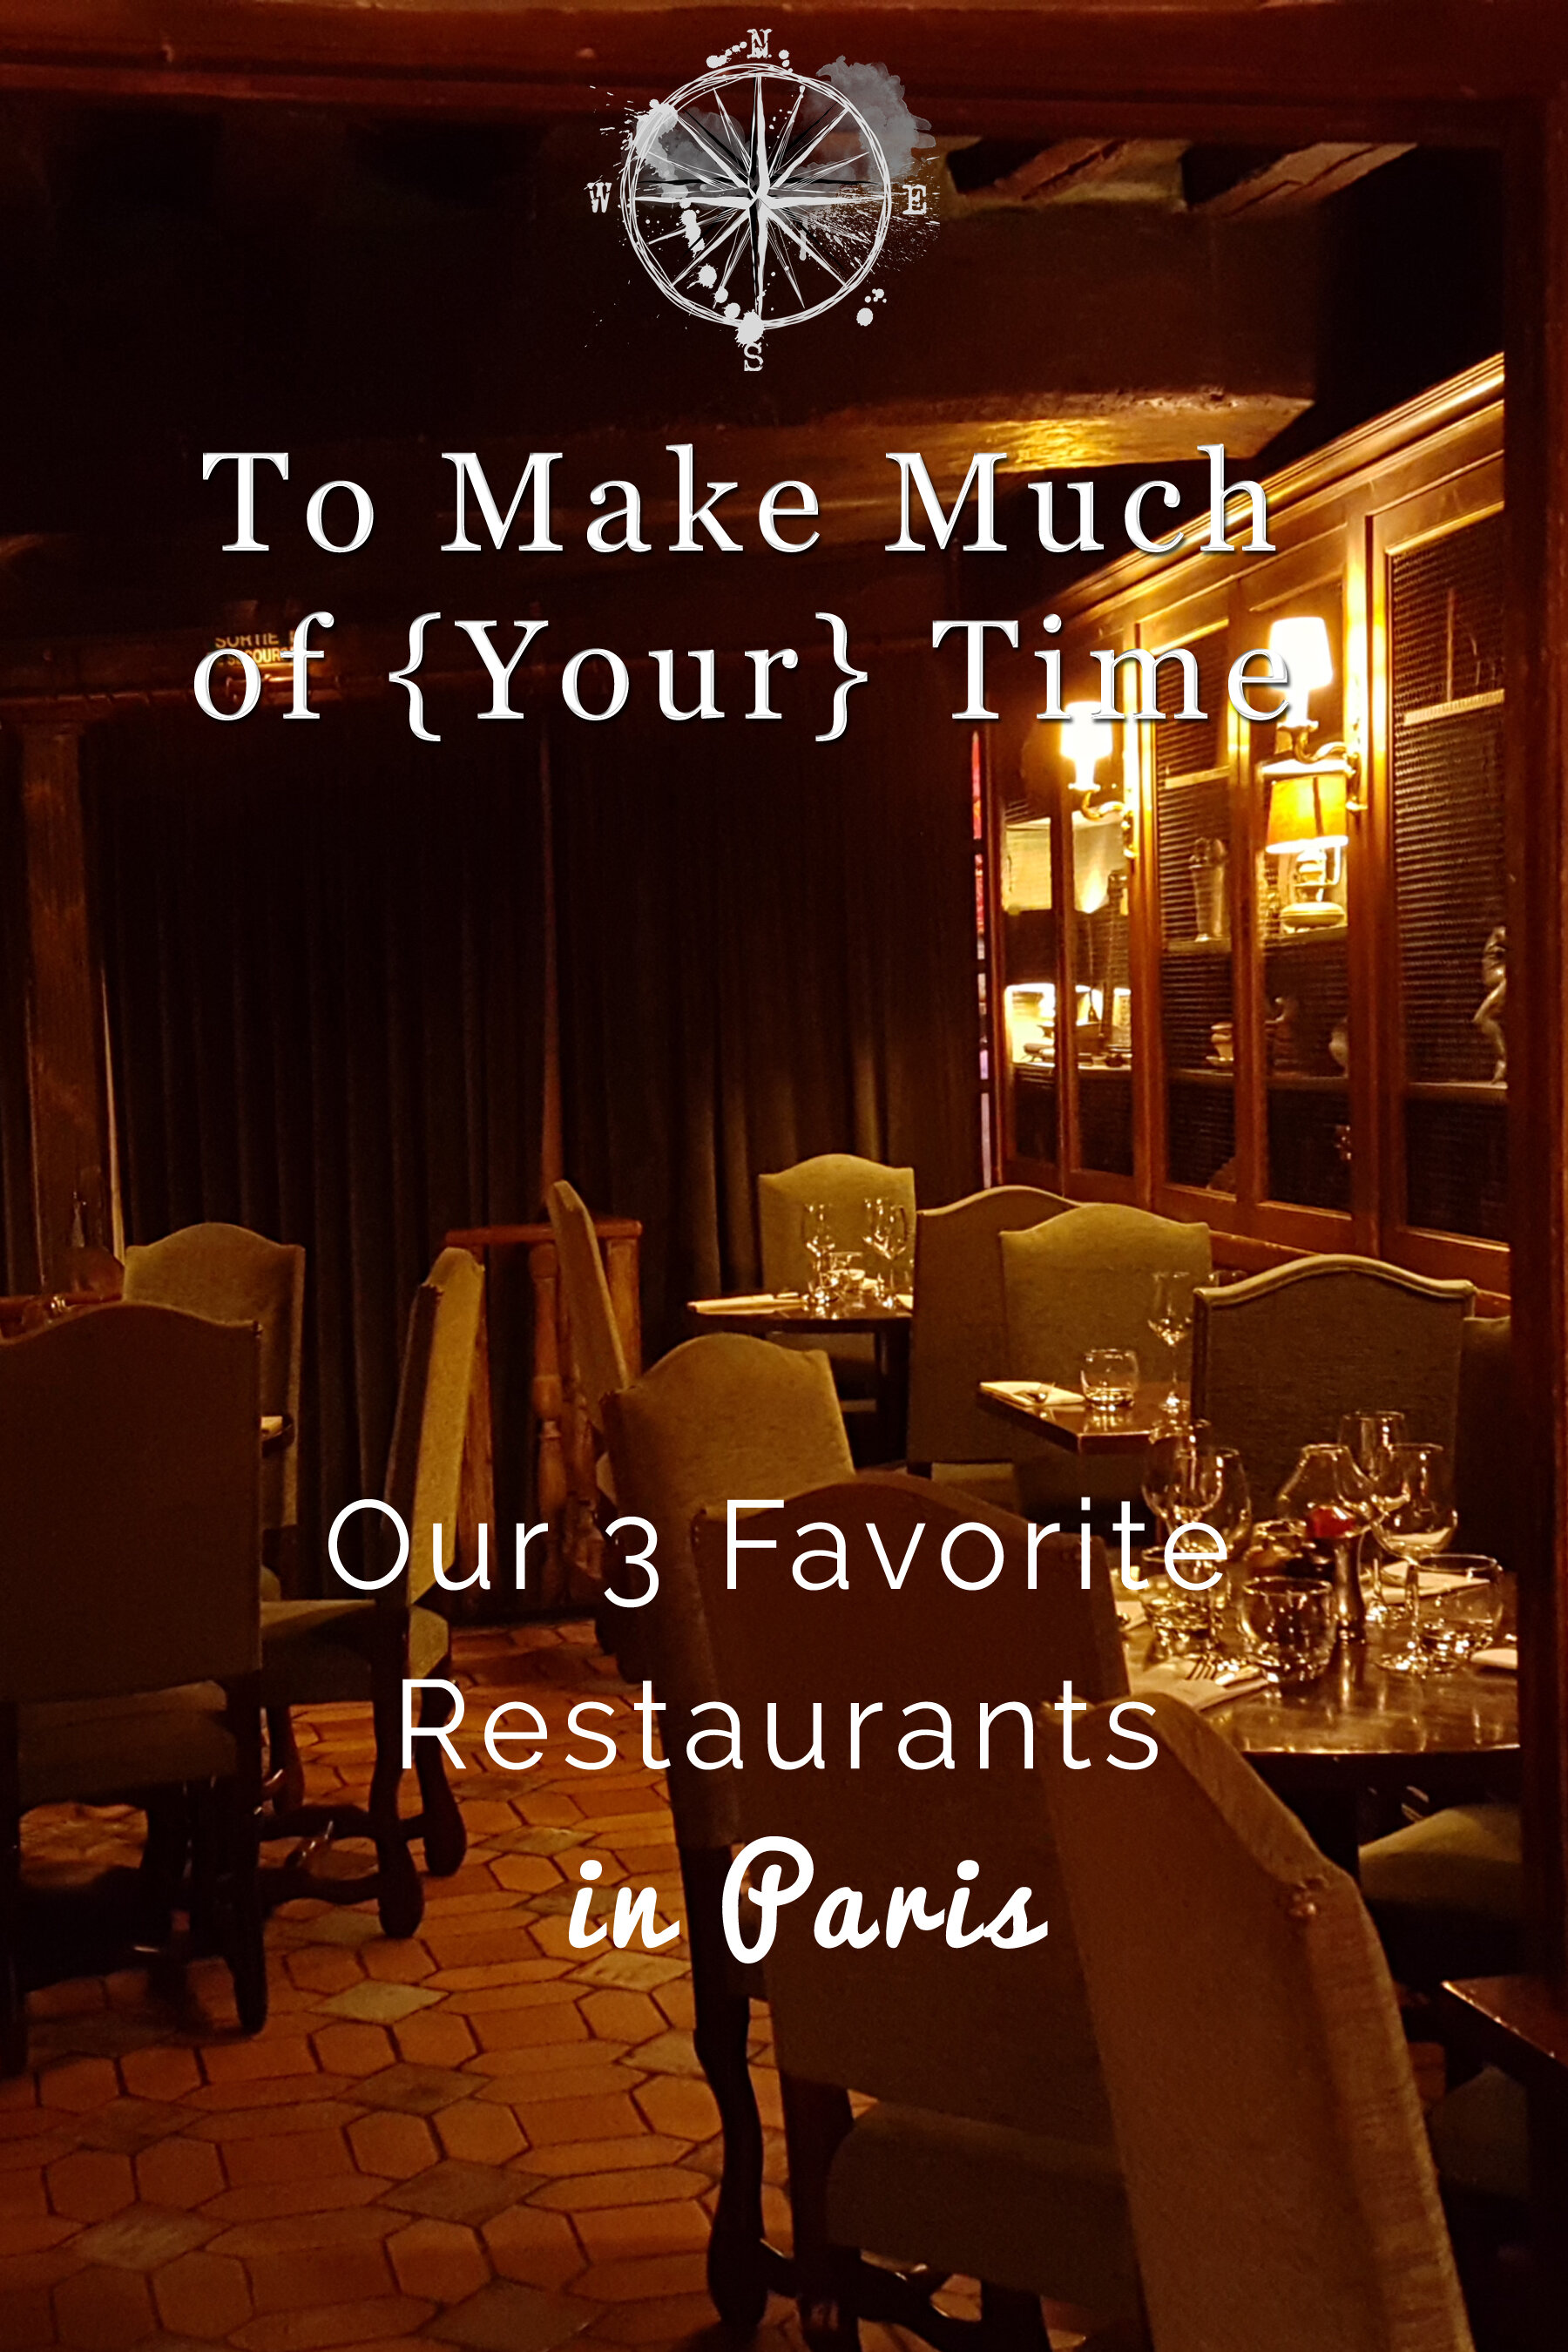 Our Three Favorite Restaurants in Paris — To Make Much of Time